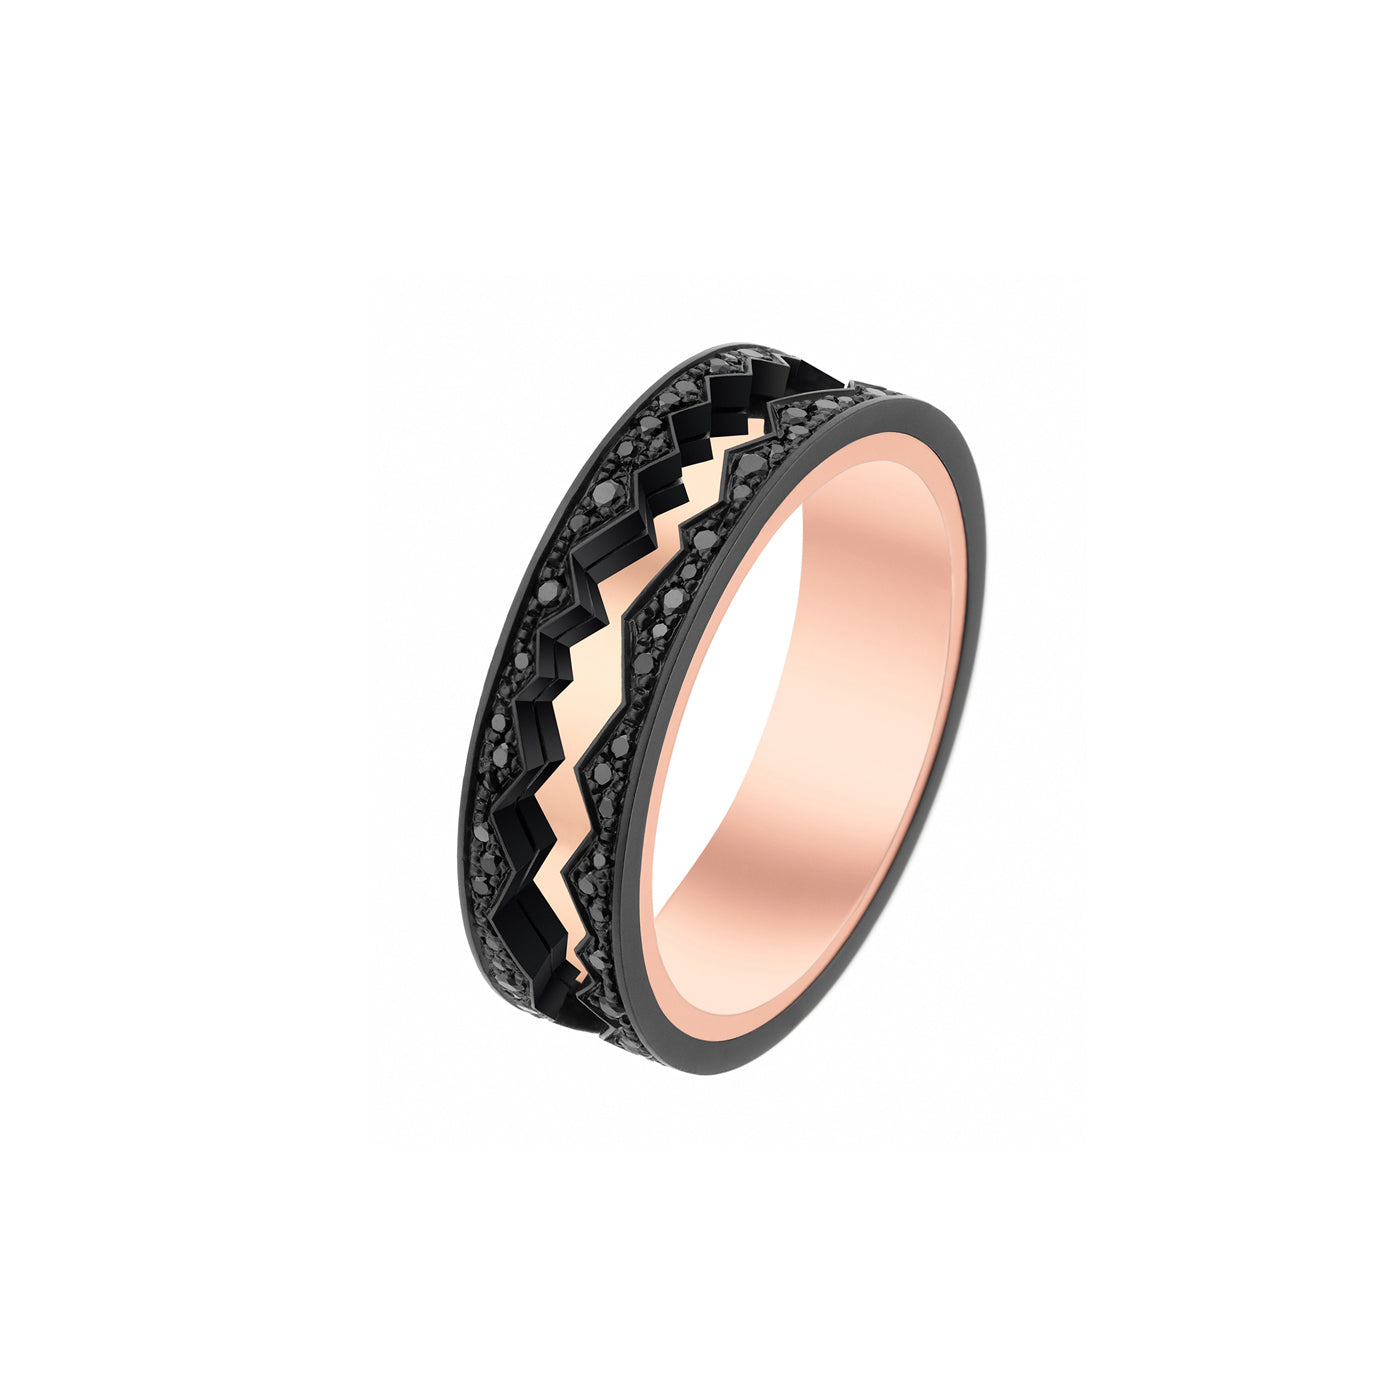 CAPTURE IN MOTION PINK GOLD AND BLACK GOLD BLACK DIAMOND RING